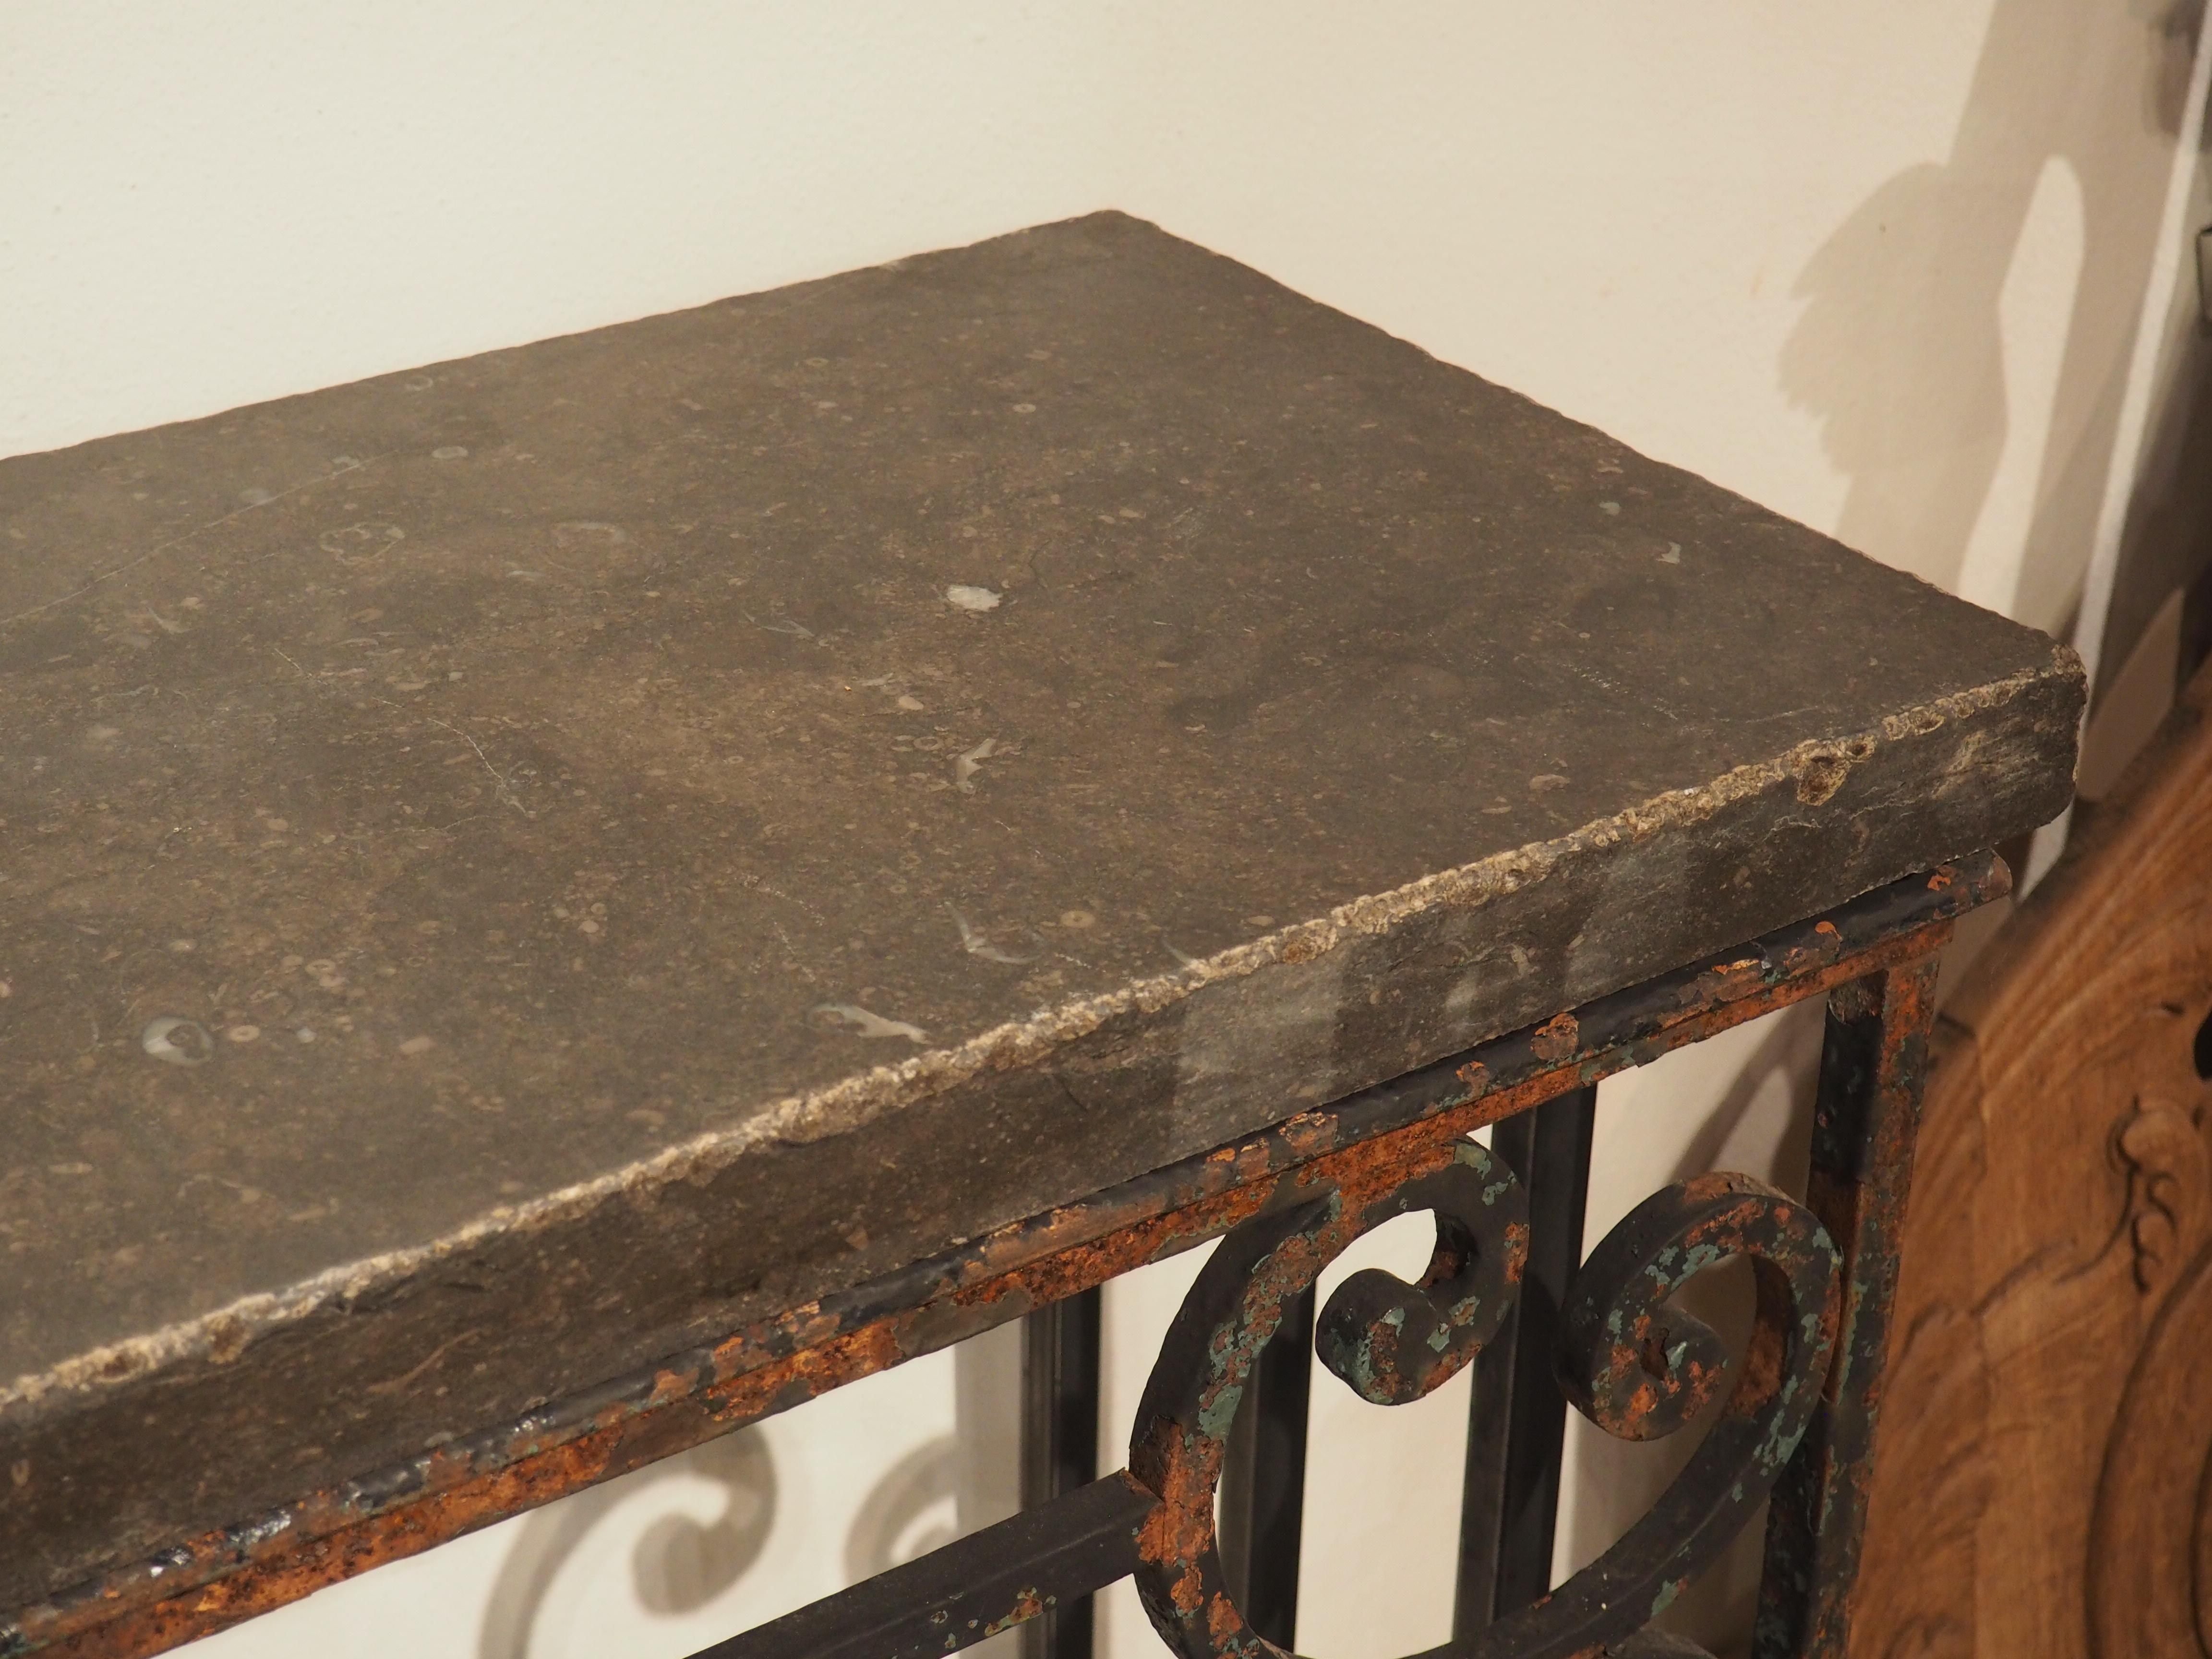 Stone 19th Century French Iron Balcony Gate Console Table with Belgian Bluestone